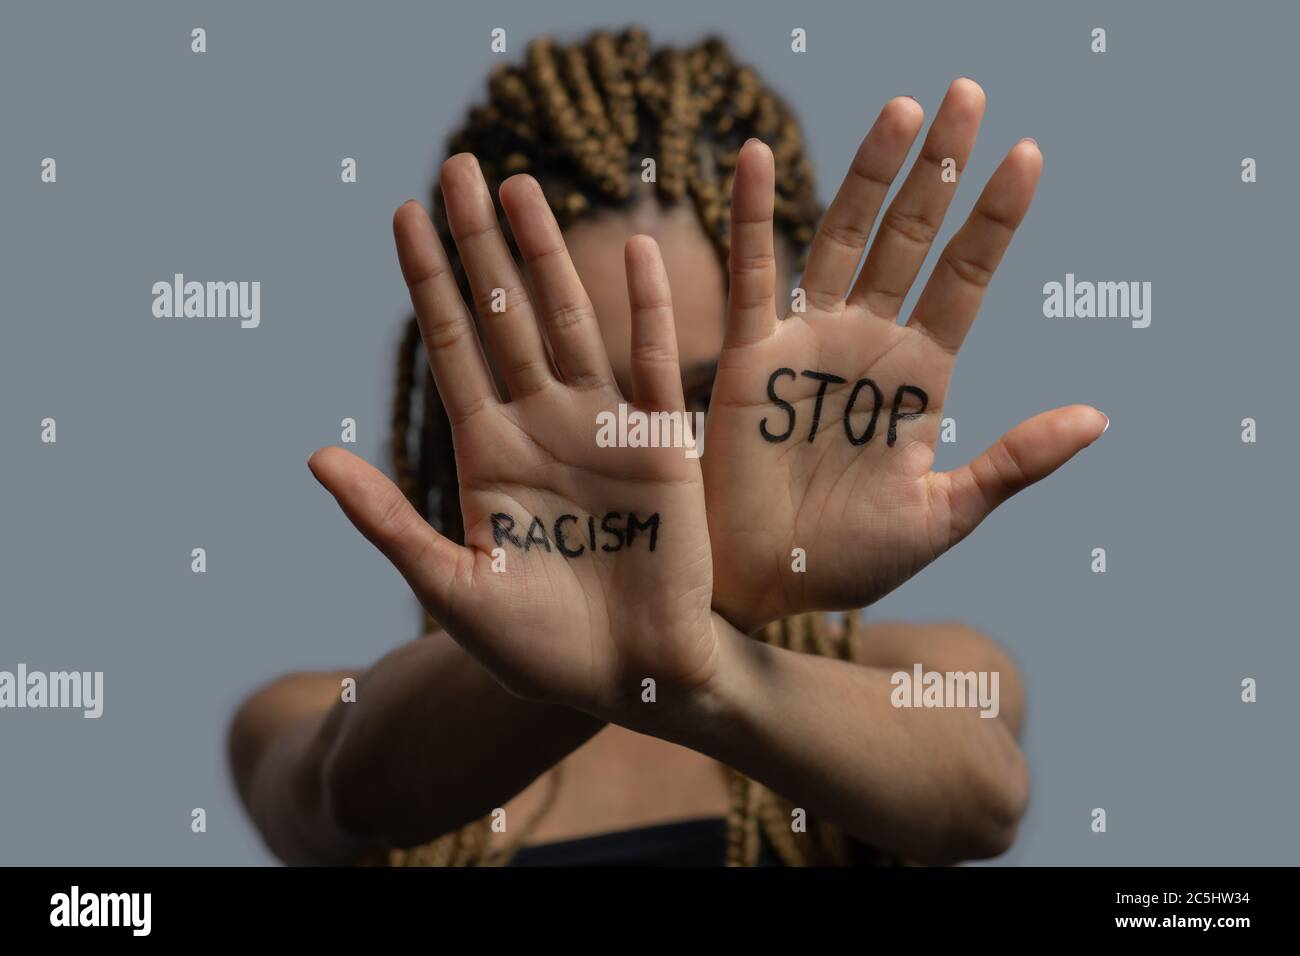 Young African American woman hiding her face with crossed palms, showing stop racism lettering Stock Photo